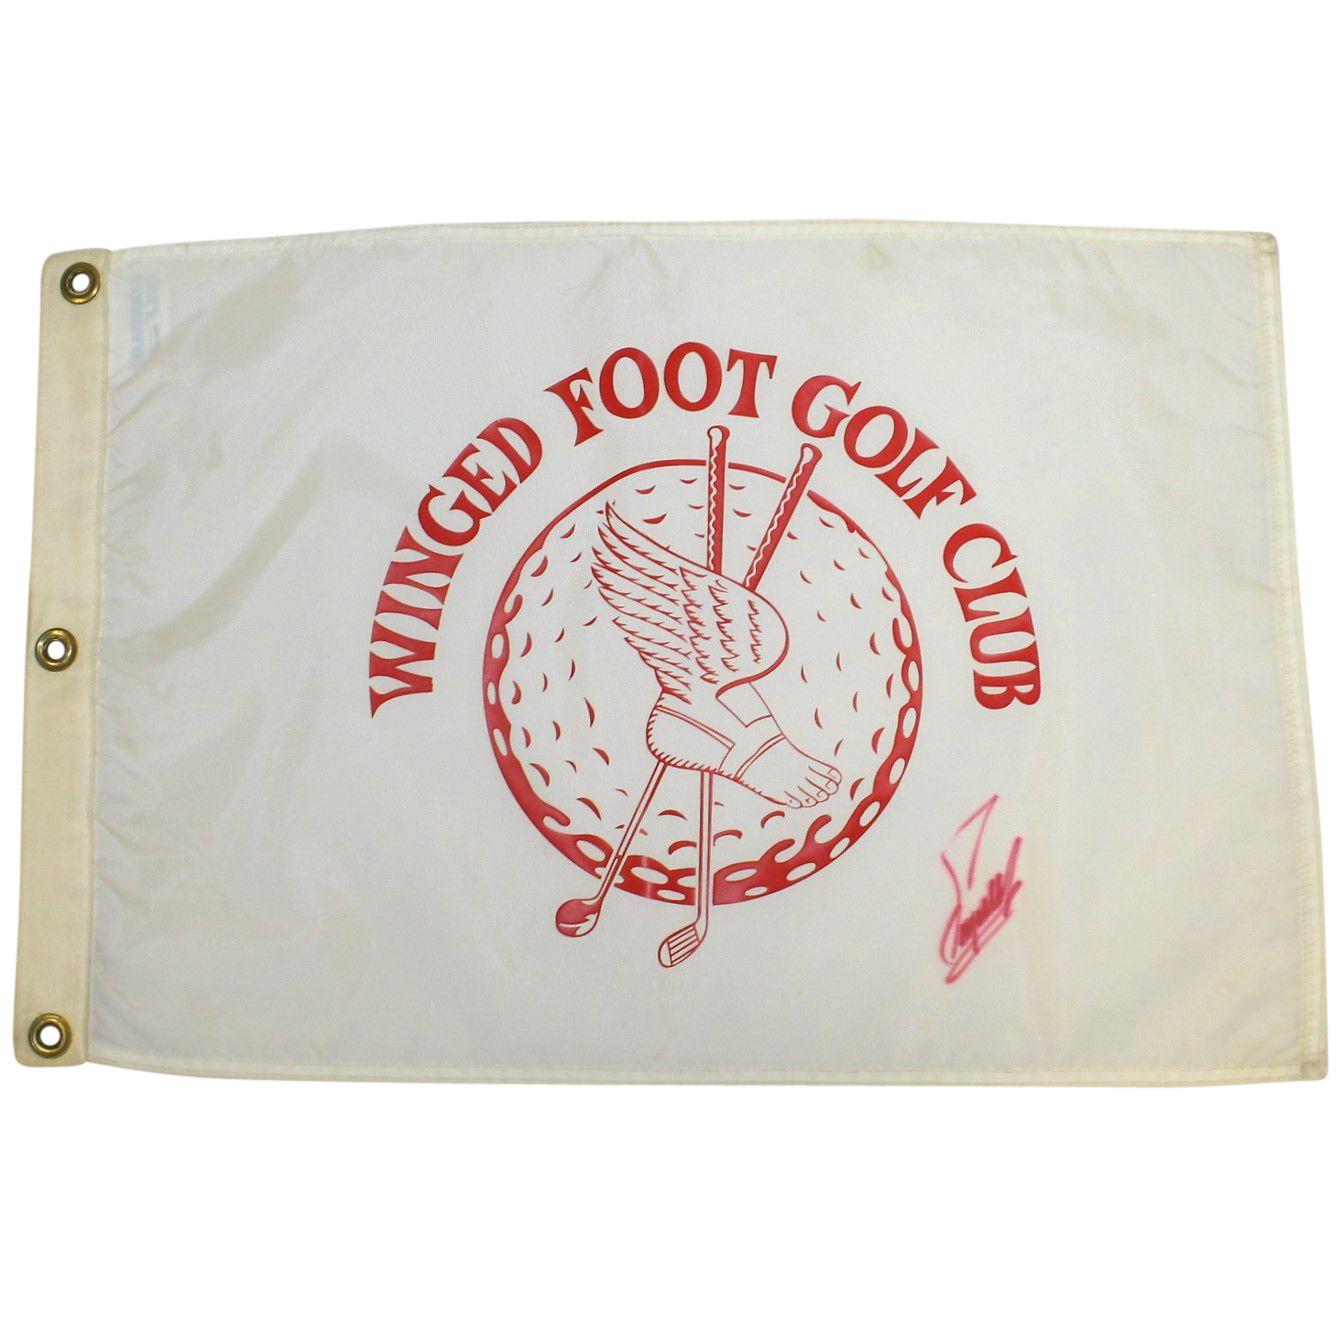 Red Winged Foot Logo - Lot Detail Zoeller Signed Winged Foot Golf Club White Red